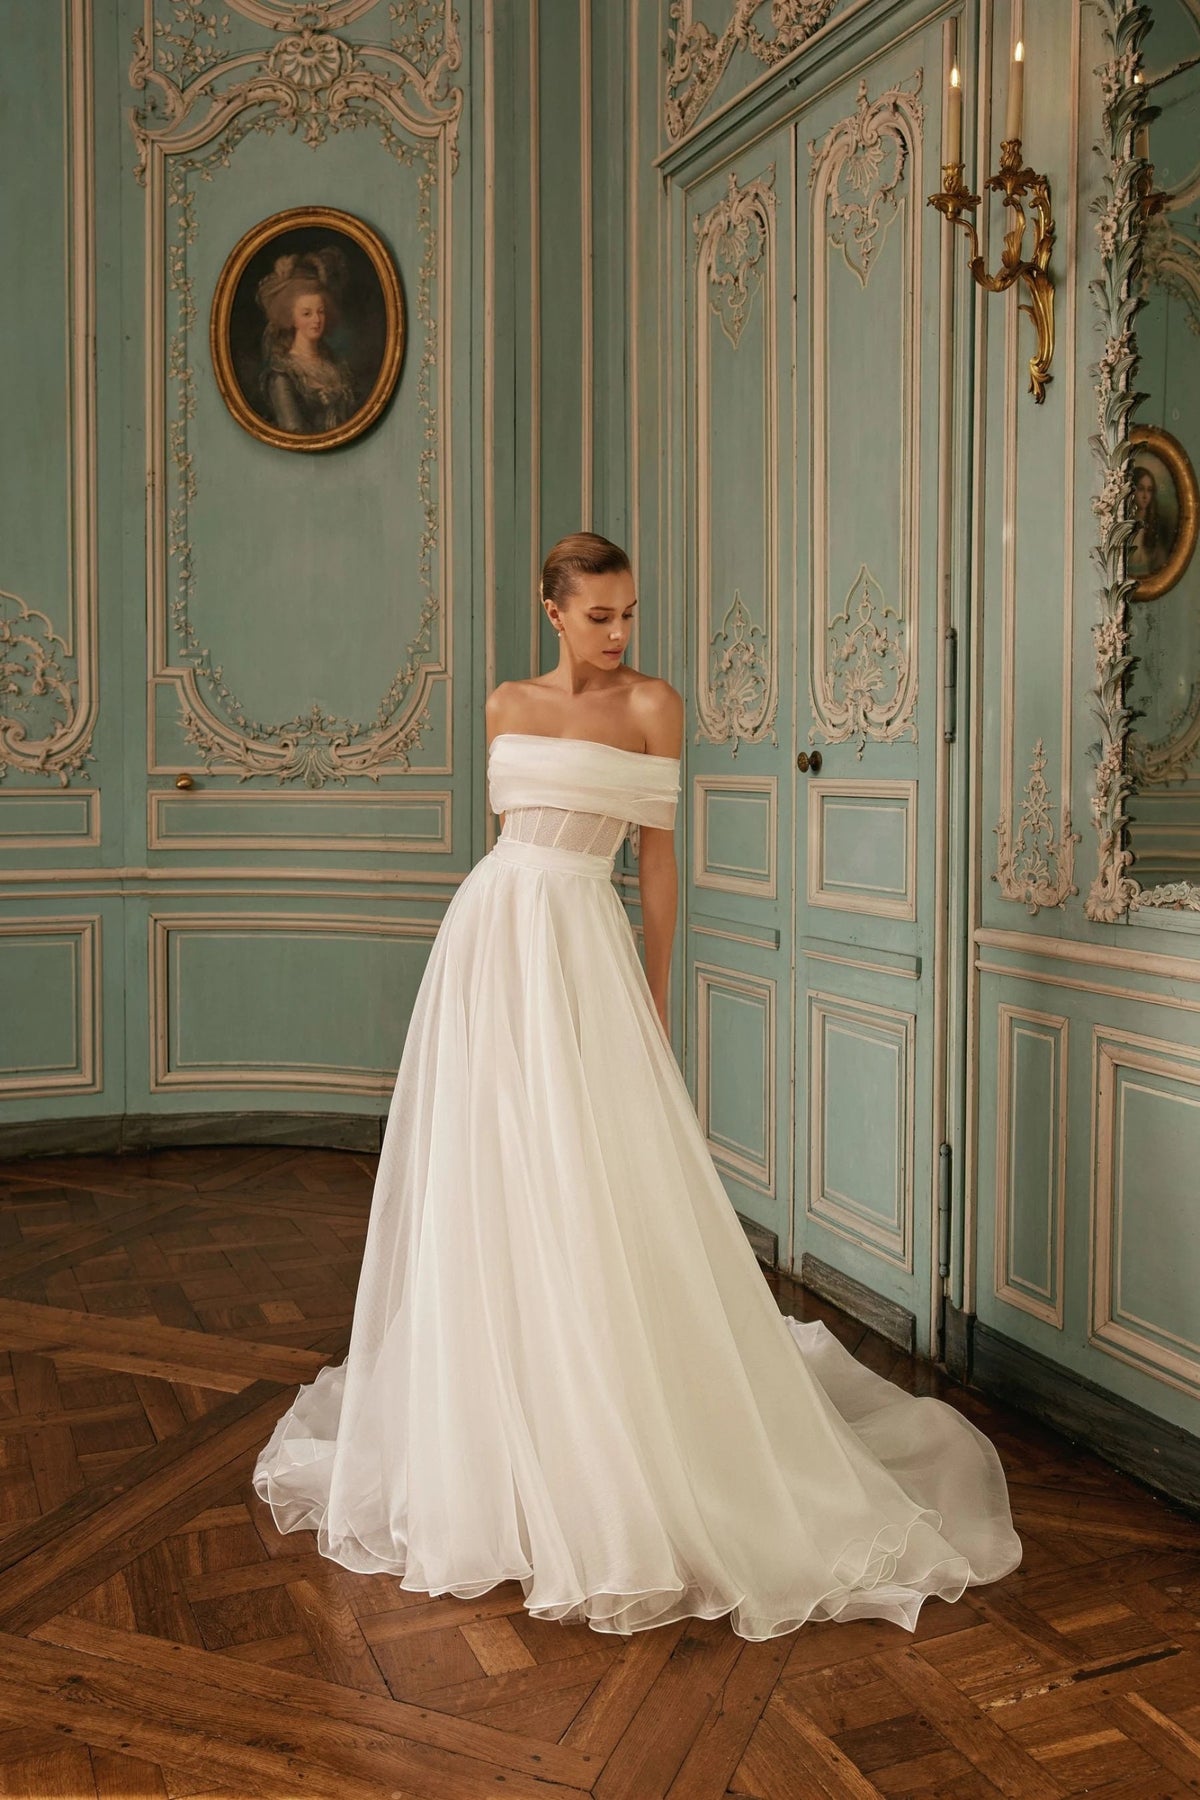 Comfortable Sleeveless Straight Neckline Aline Wedding Dress Bridal Gown Open Back Off the Shoulder Detachable Puff Sleeves Train Organza